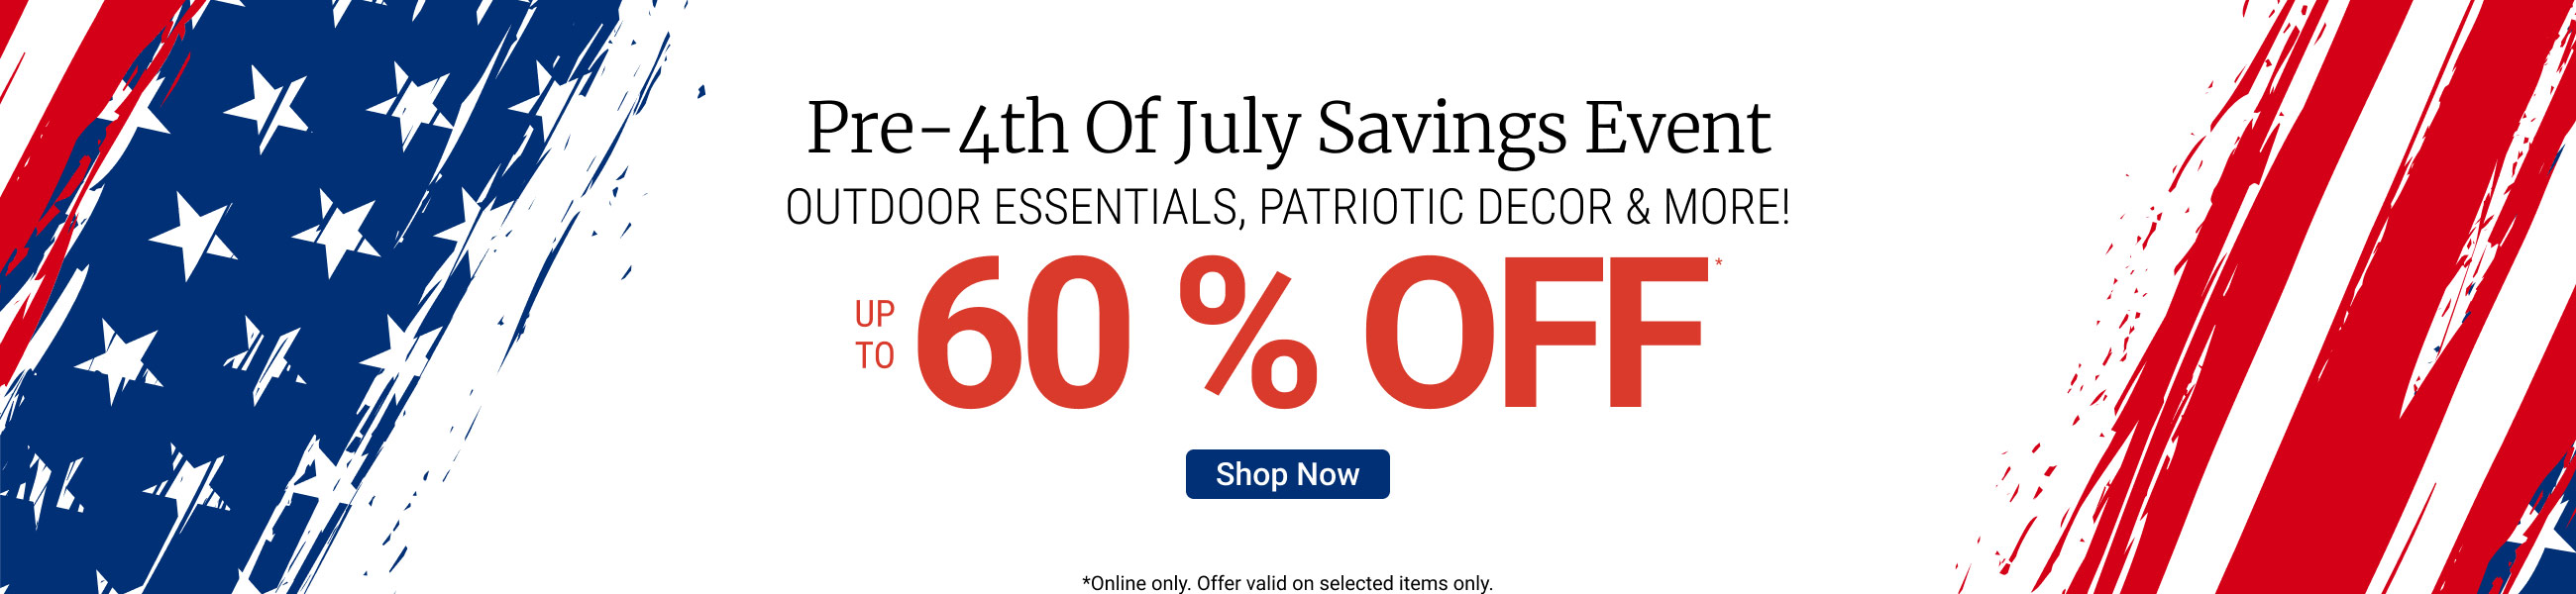 Pre-4th of July savings event up to 60% off - shop now